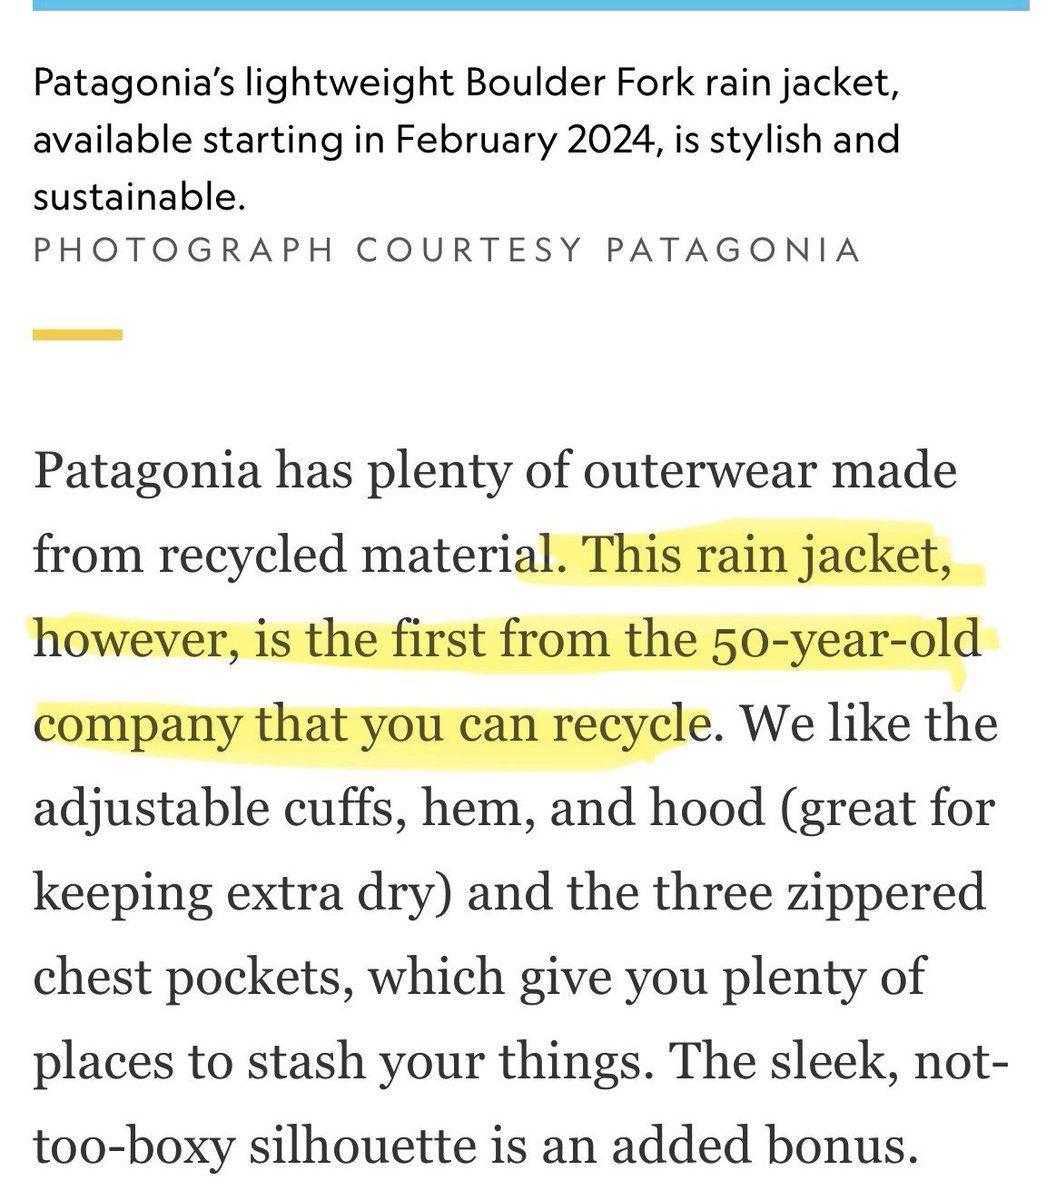 Here’s a new one: @NatGeo rounded up Valentine’s Day gifts (🙄) and included a @patagonia jacket “you can recycle.” I can? Where? So confusing! Also: affiliate marketing, so take recommendations with a grain of salt. #buynothing #greenwashing